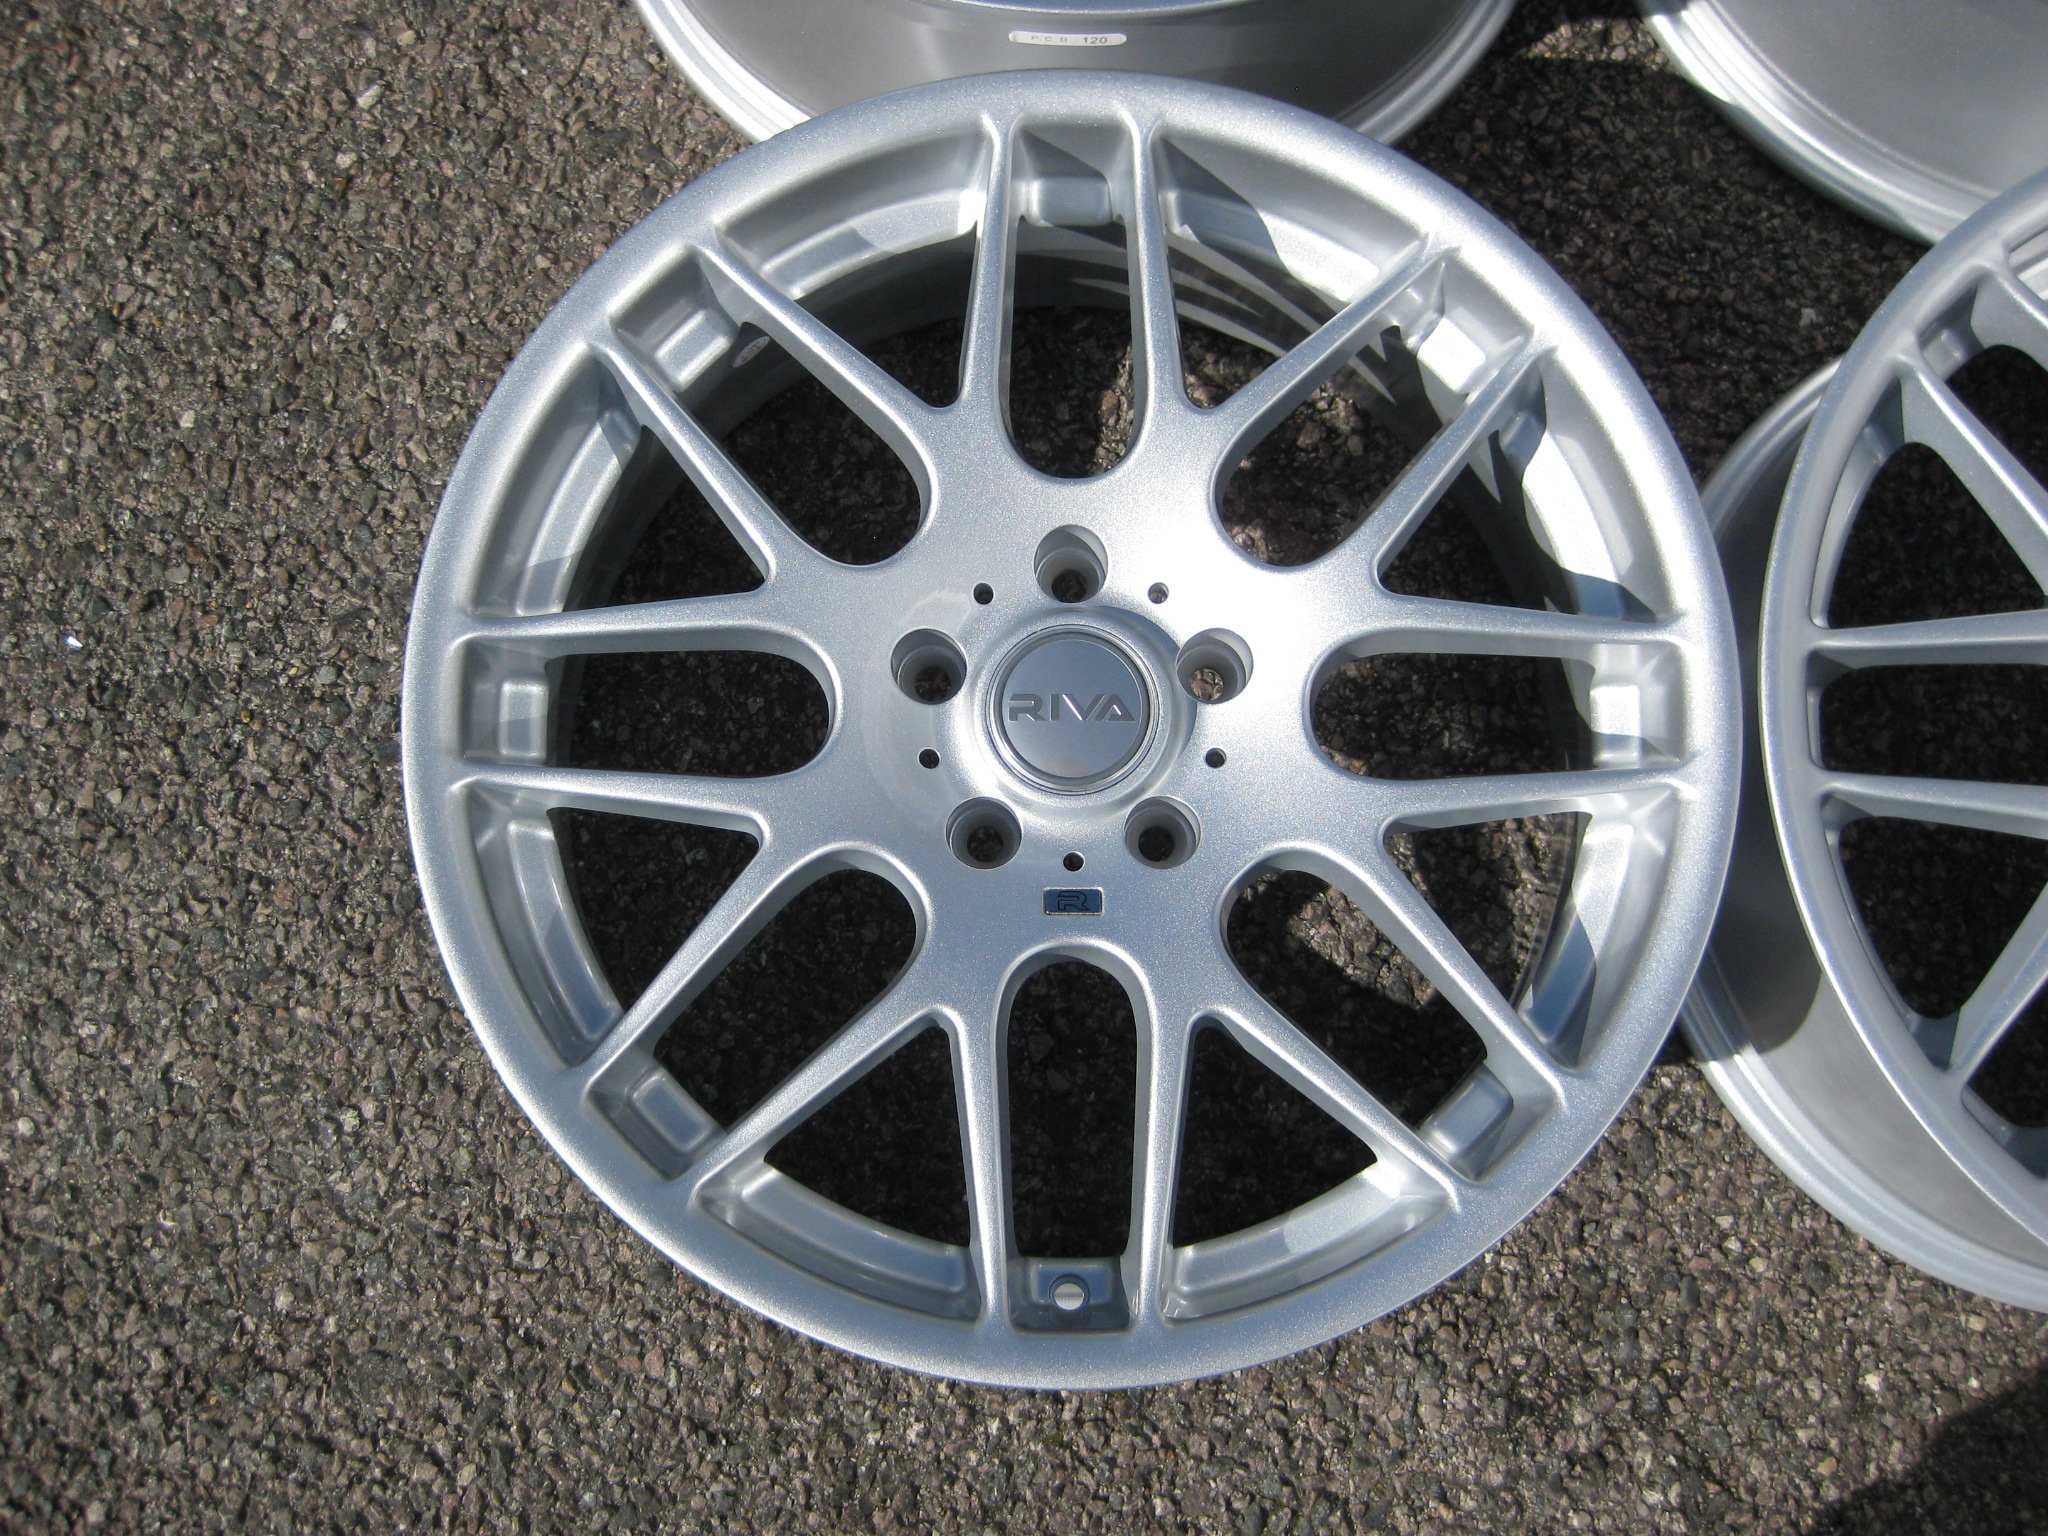 NEW 18" RIVA FOX DTM CSL ALLOY WHEELS FINISHED IN SILVER, DEEPER LOOK, WIDER REAR'S